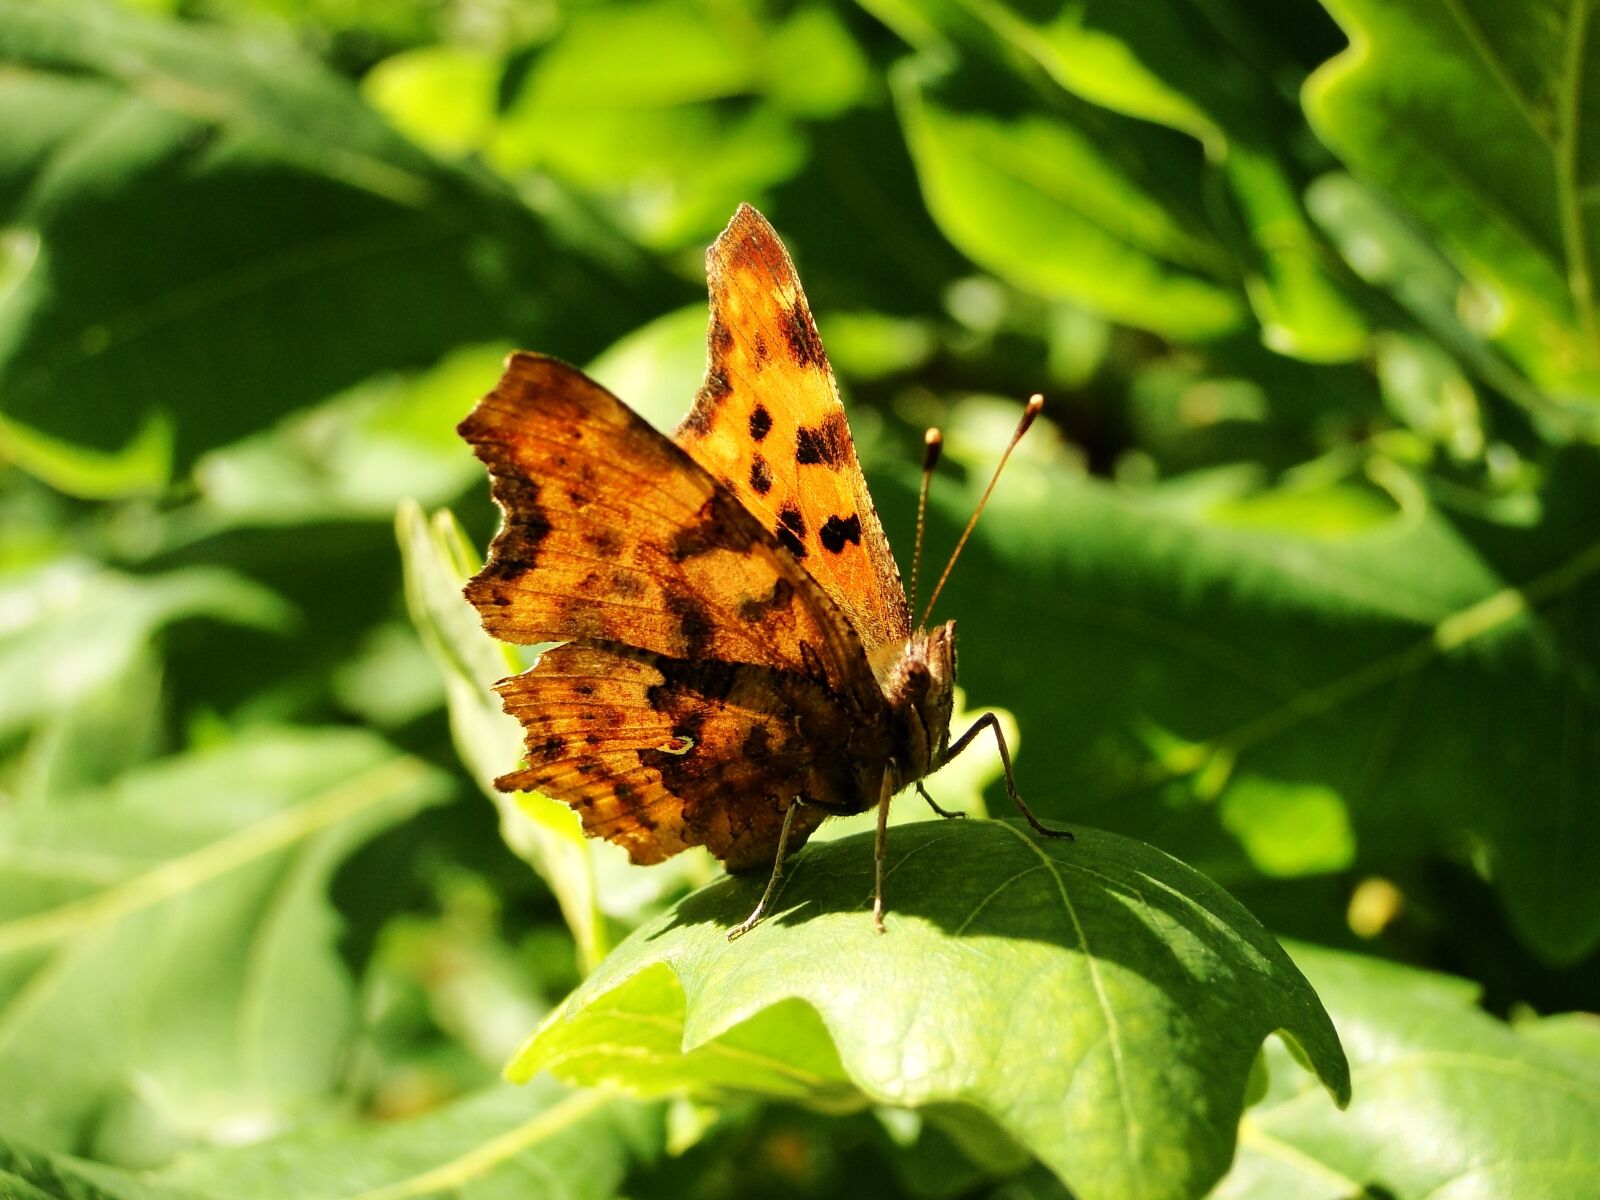 Sony Cyber-shot DSC-HX1 sample photo. Nature, insect, butterfly day photography